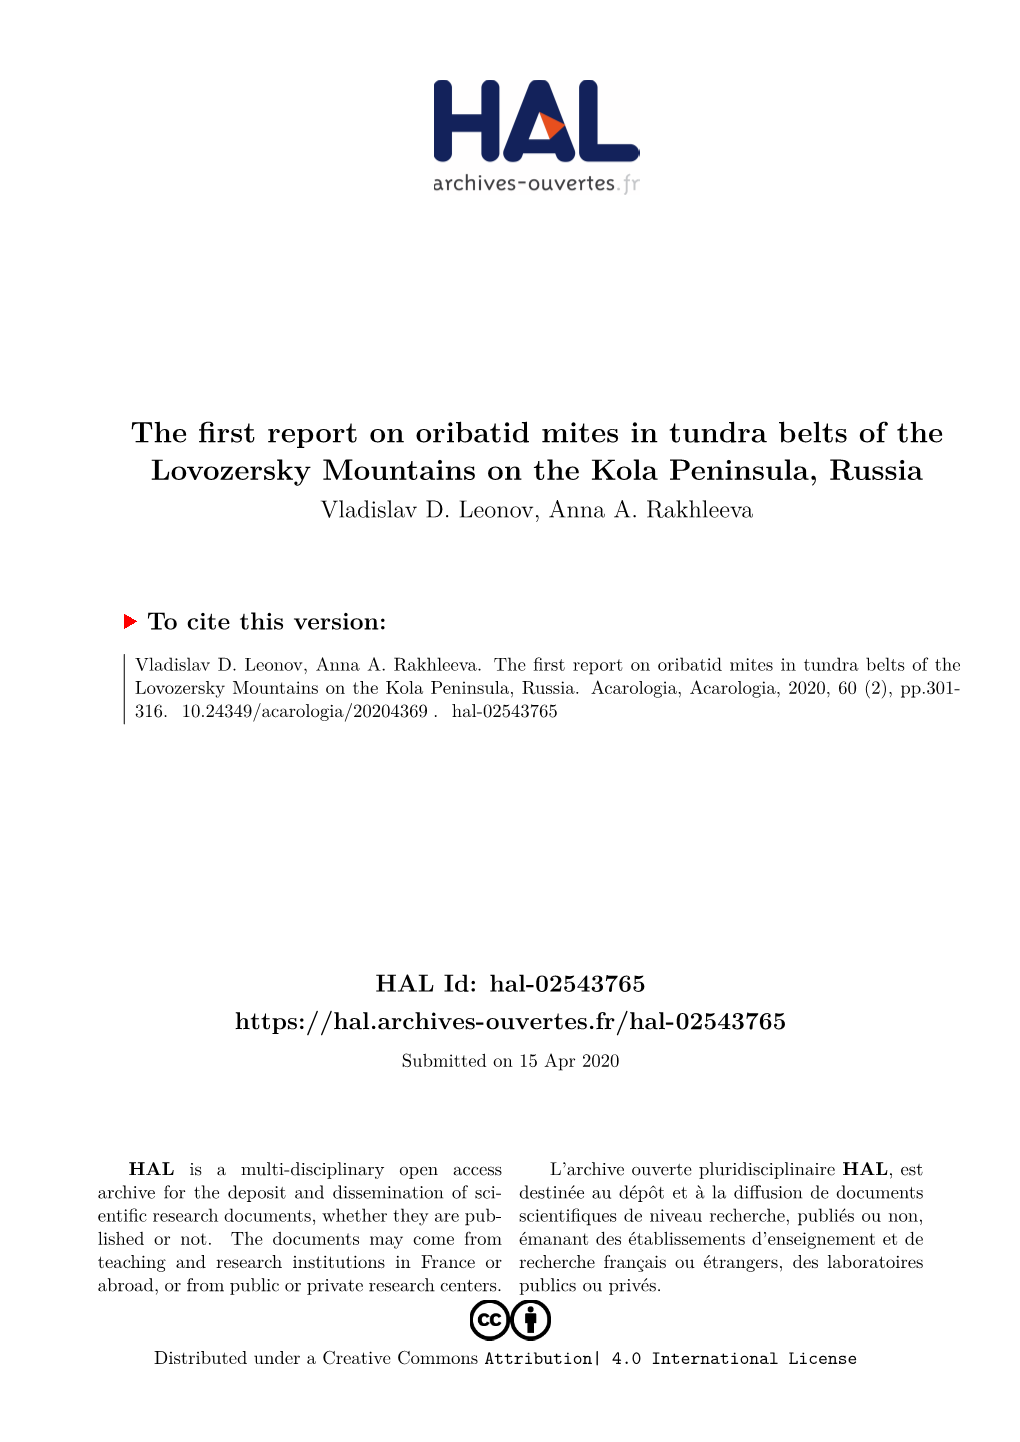 The First Report on Oribatid Mites in Tundra Belts of the Lovozersky Mountains on the Kola Peninsula, Russia